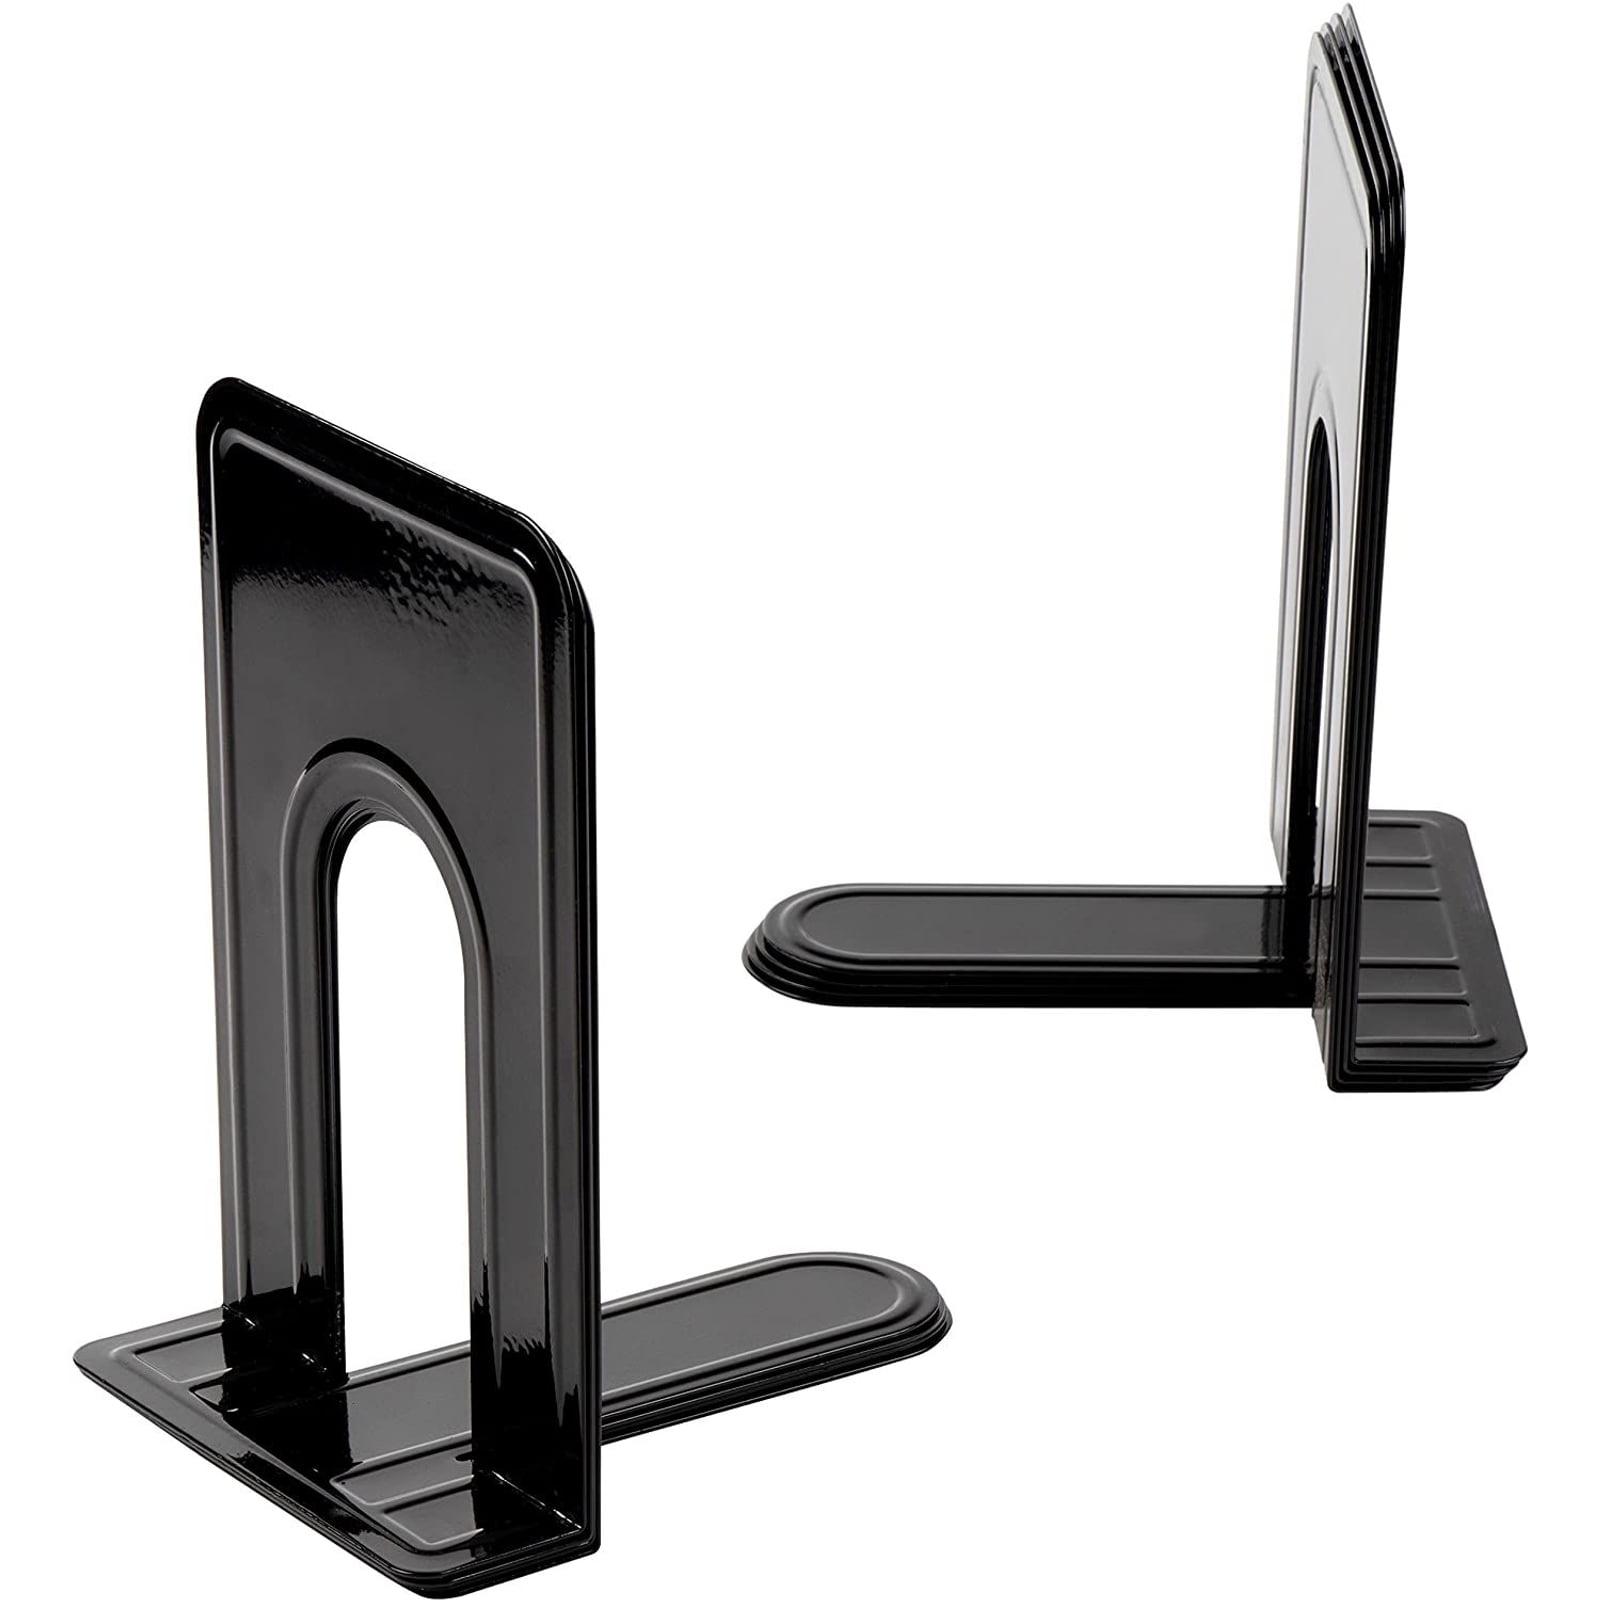 Book End Stopper Dividers for Shelves/Reader Stationery/Fathers Day Gift/Library Home Office School Decorative,Black Metal Bookends